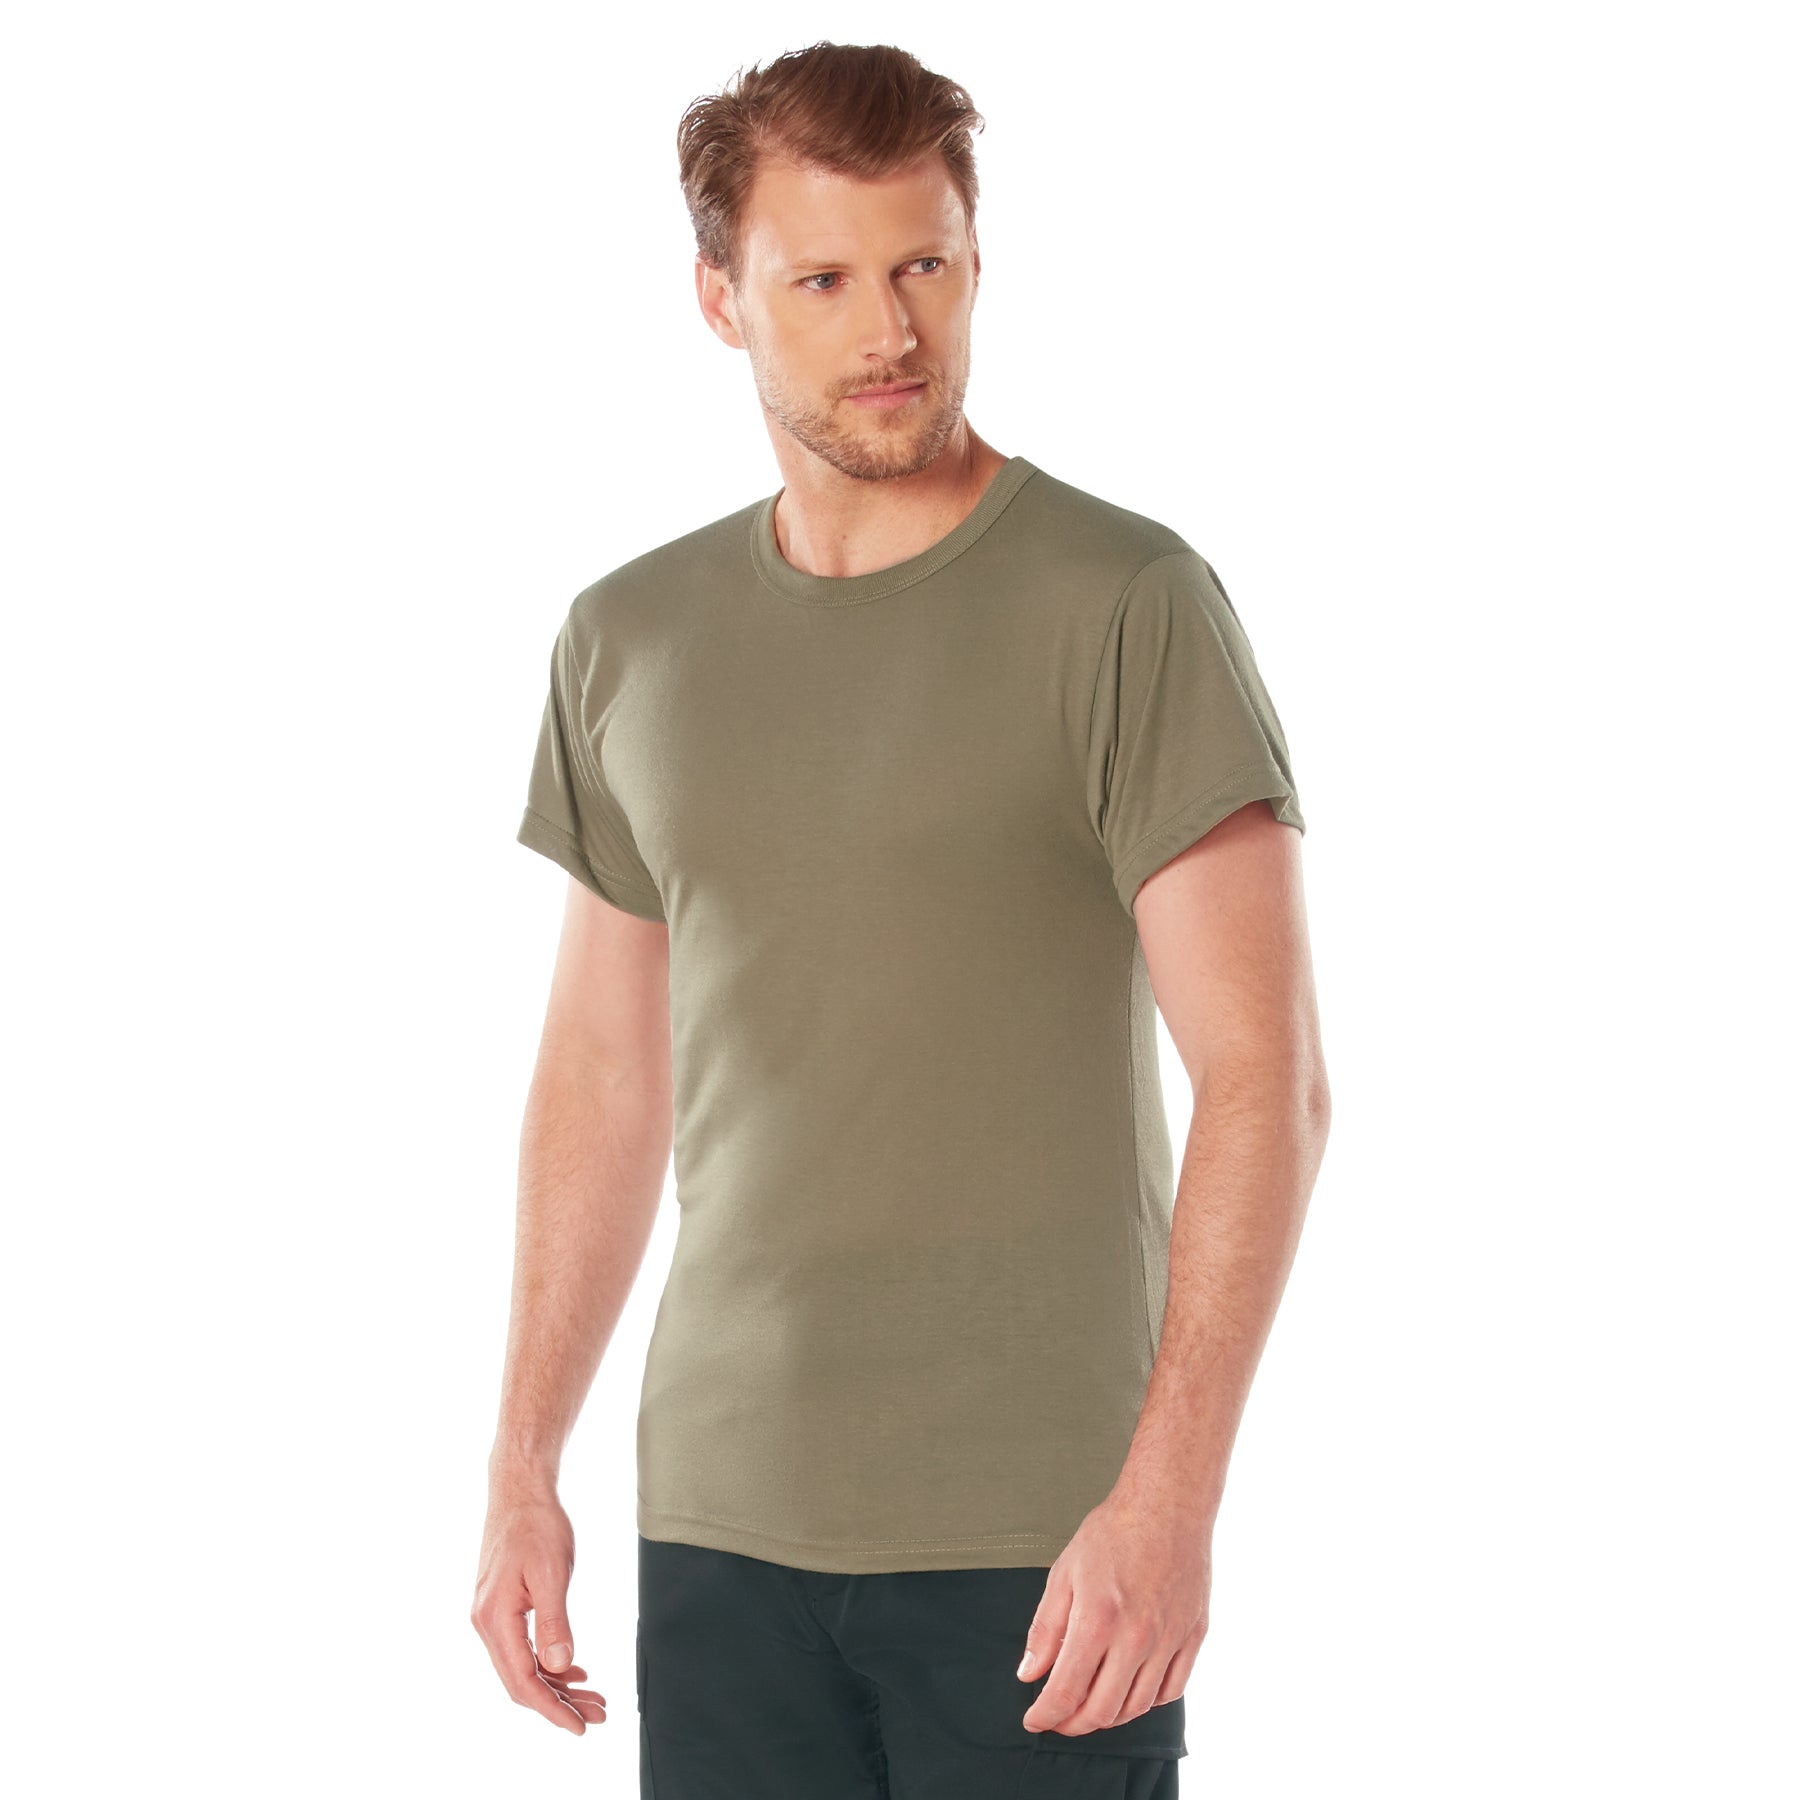 [AR 670-1] Poly Moisture Wicking T-Shirts Coyote Brown AR 670-1